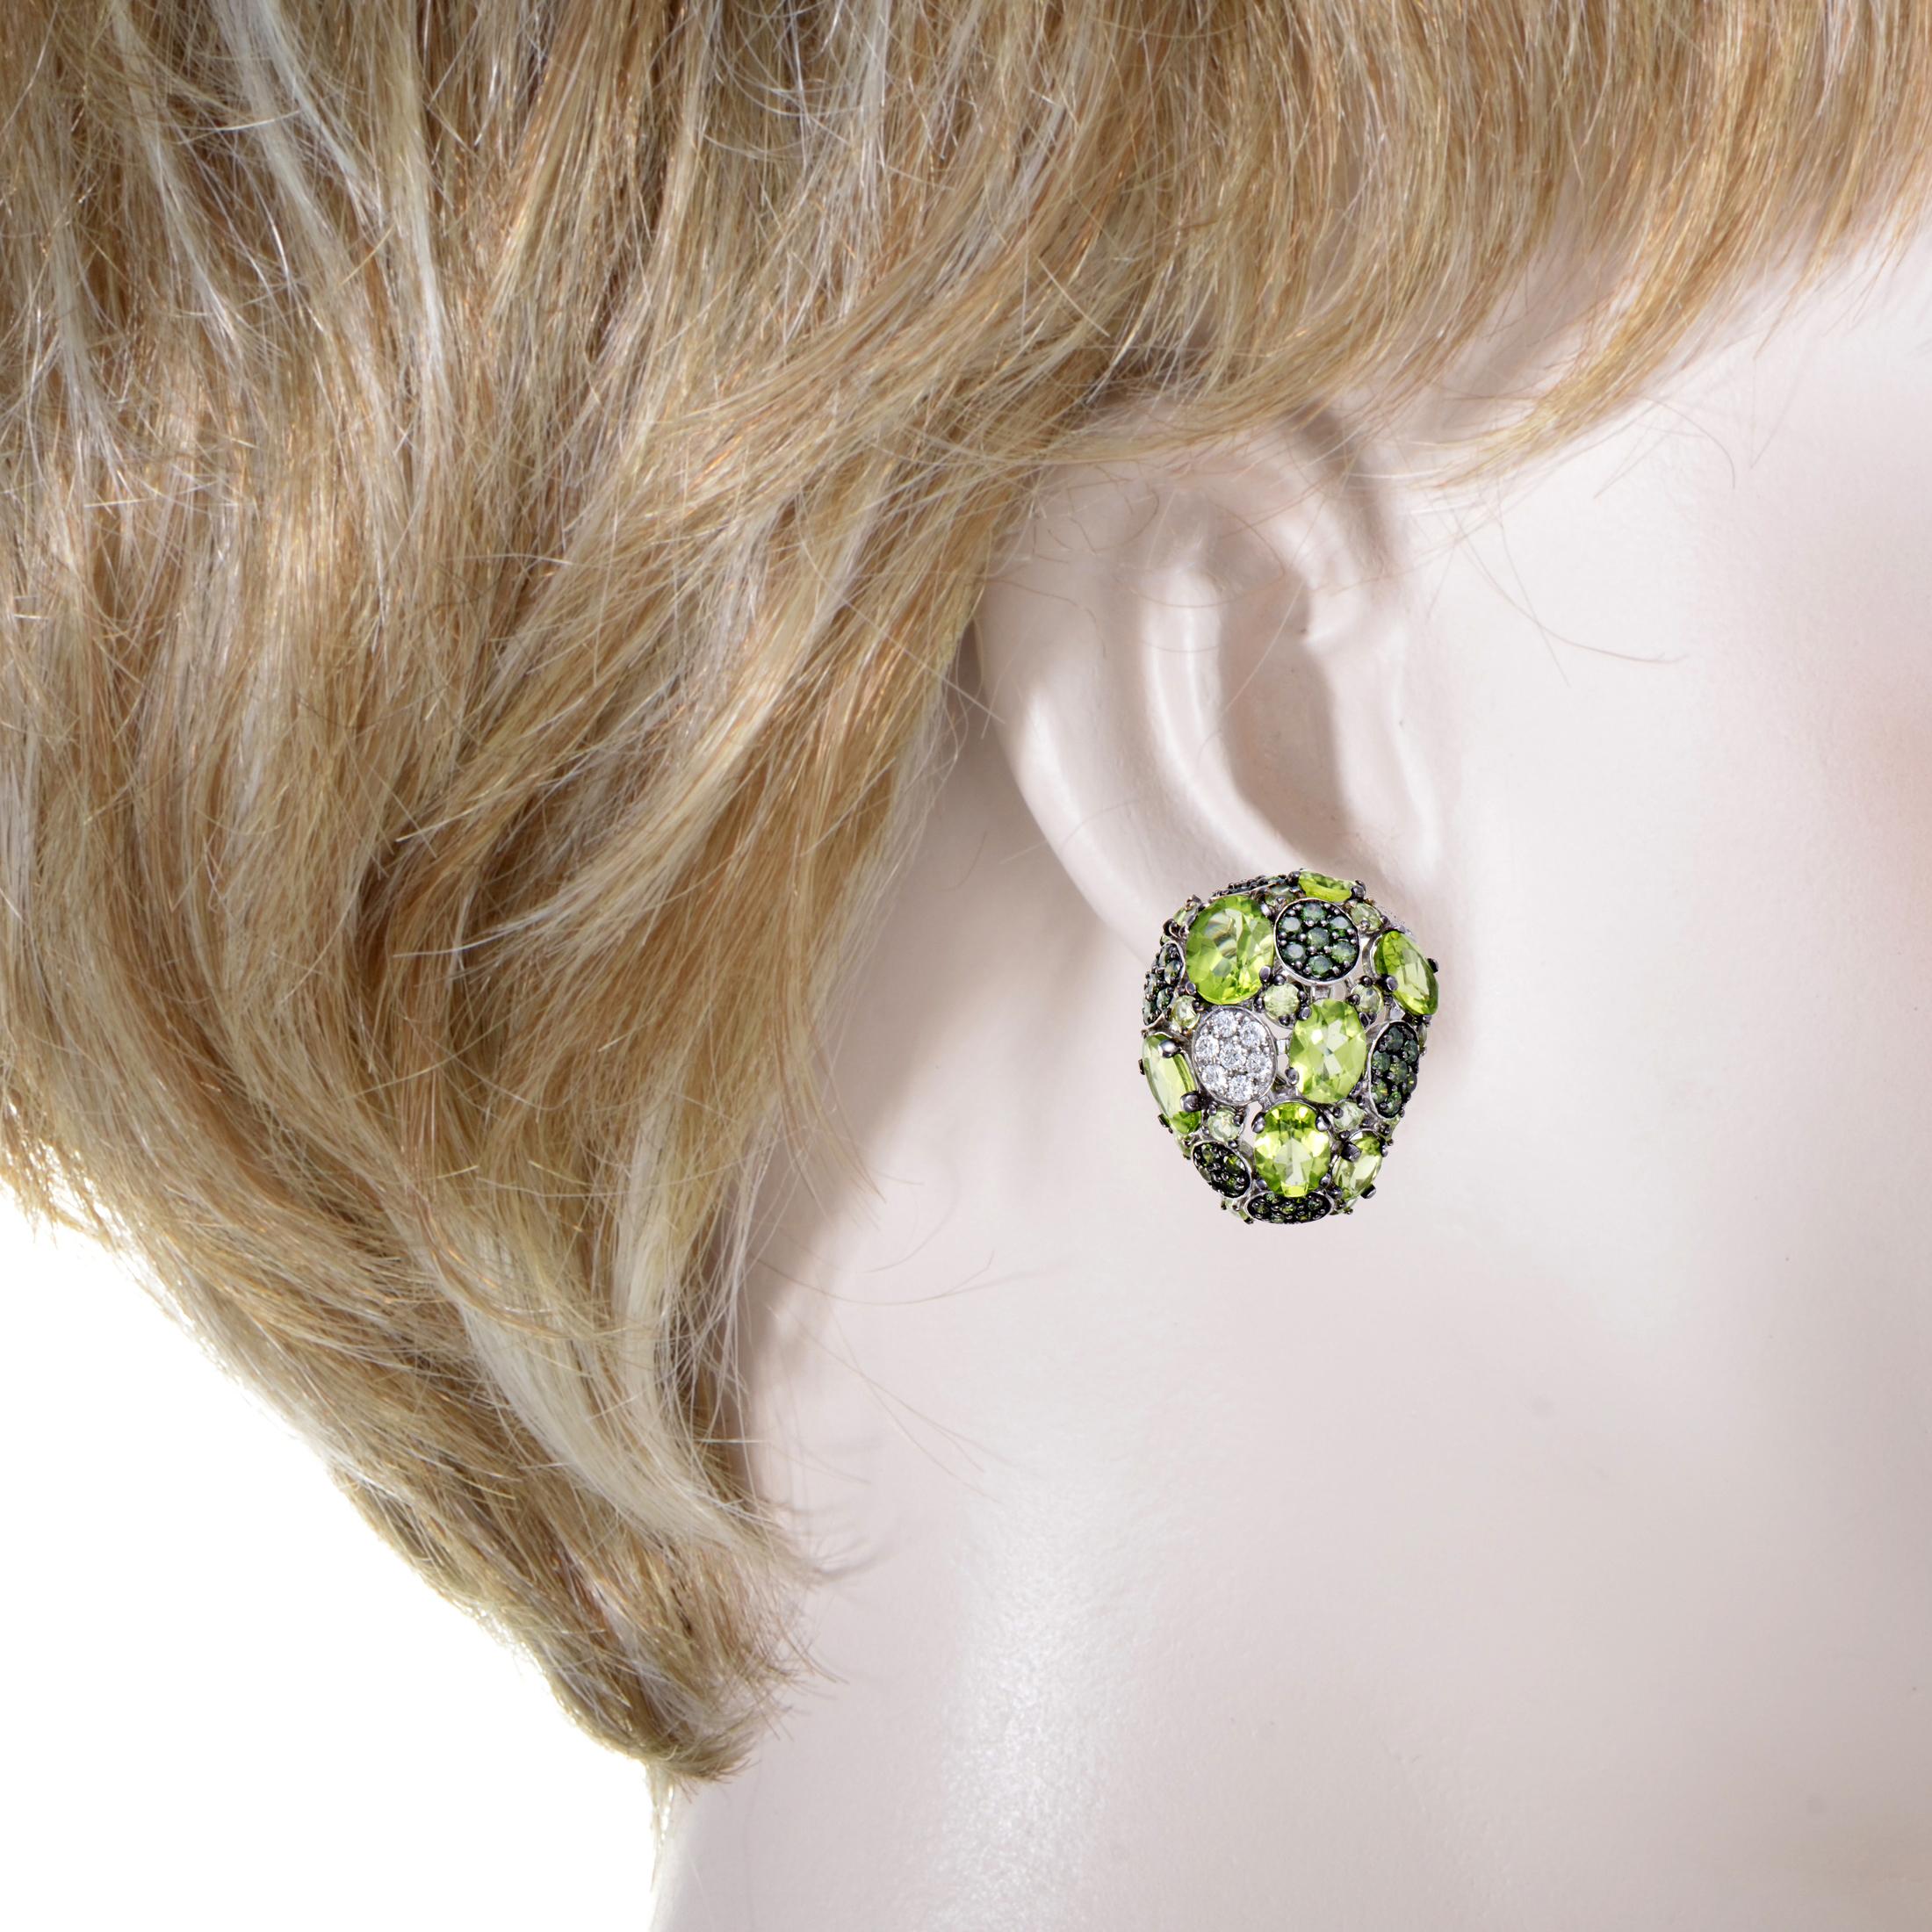 Lustrous white diamonds amounting to 0.48 ct refreshingly complement the splendid peridot stones and nifty green diamonds totaling 1.76 carats in these exceptional earrings from Roberto Coin which are made of gleaming 18K white gold.